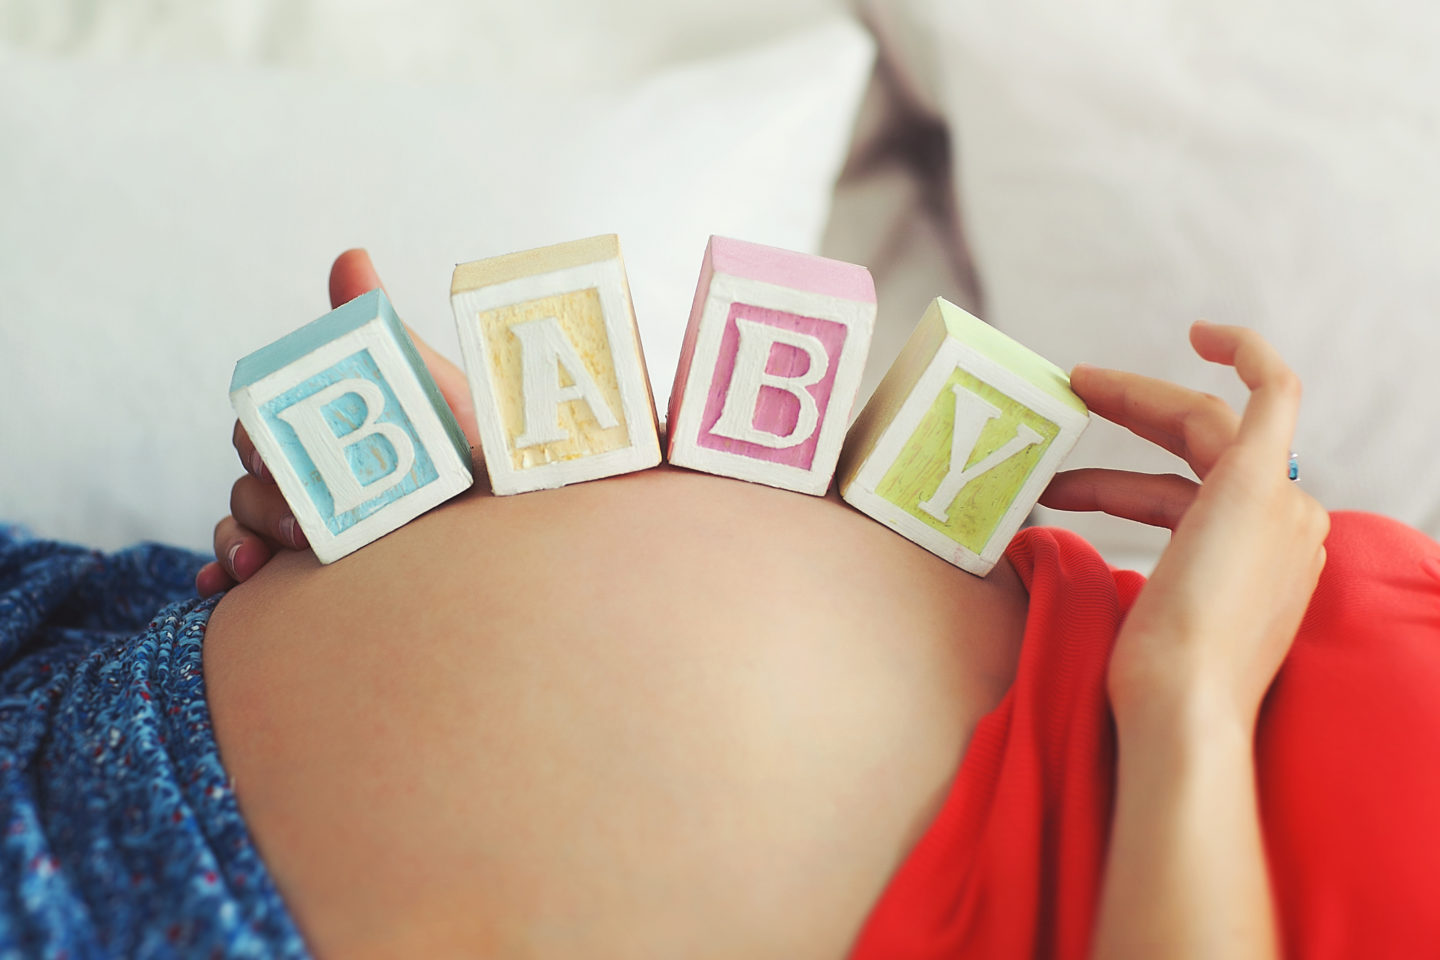 Mom’s Pregnancy Announcement Goes Viral For All The Right Reasons